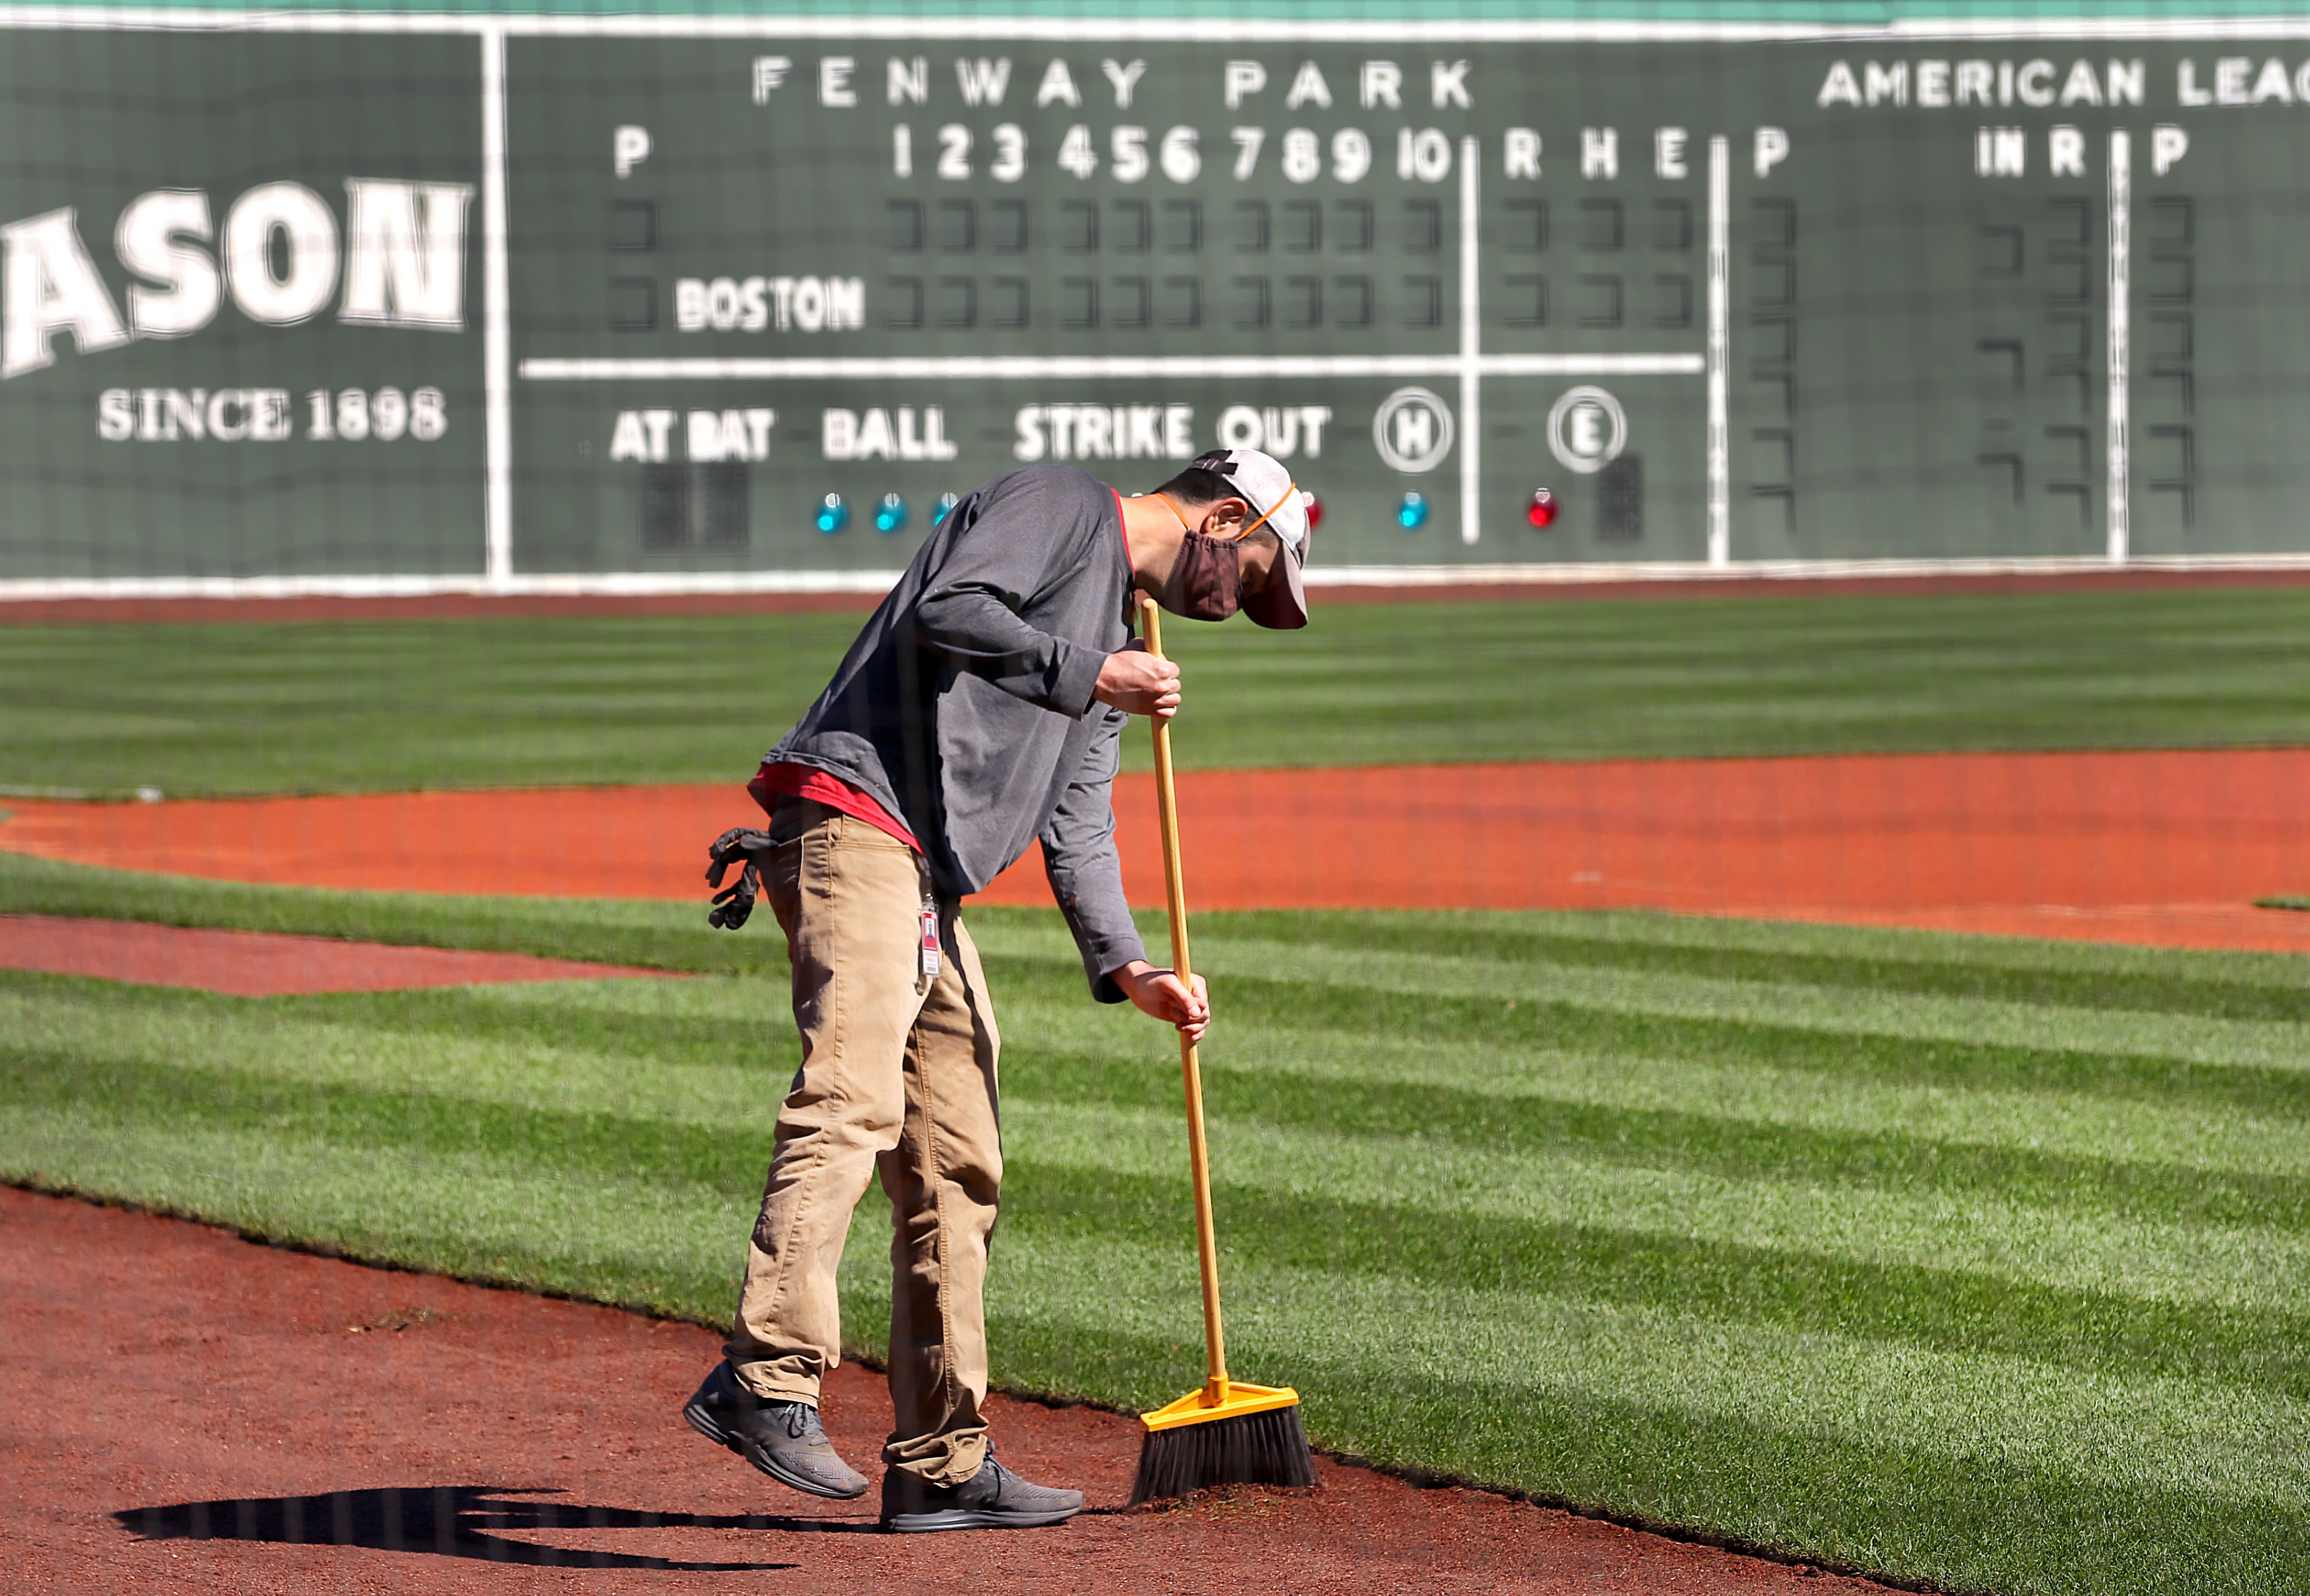 Photos: Red Sox welcome new season with Opening Day at Fenway